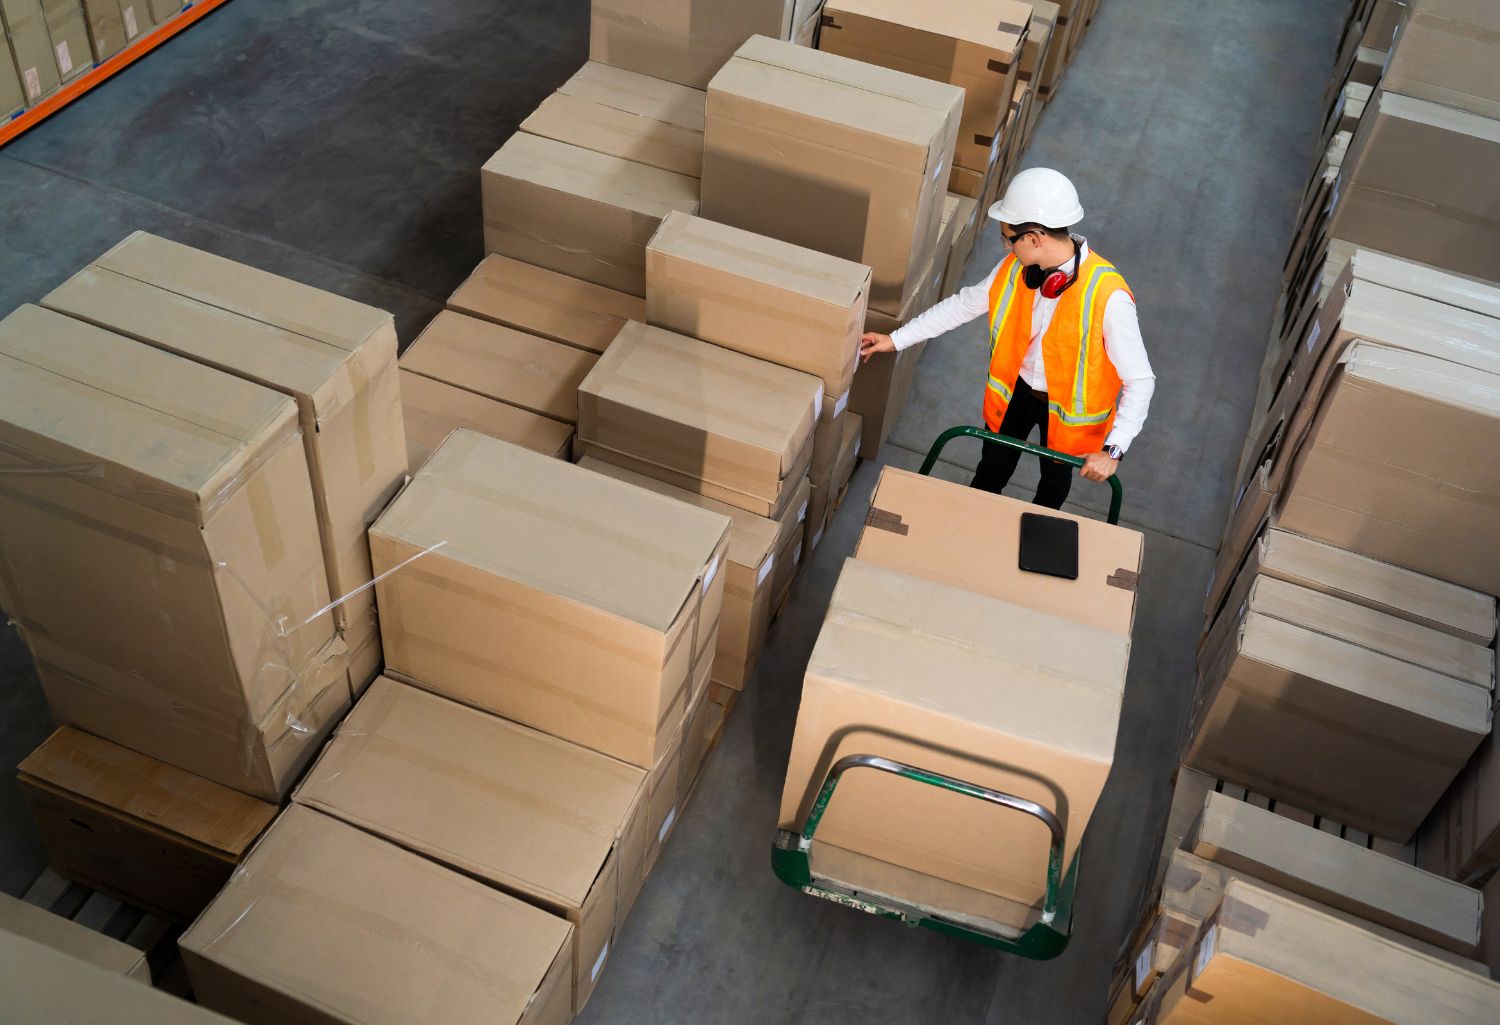 Reverse Logistics : Logistic warehouse worker delivering boxes on a trolley.